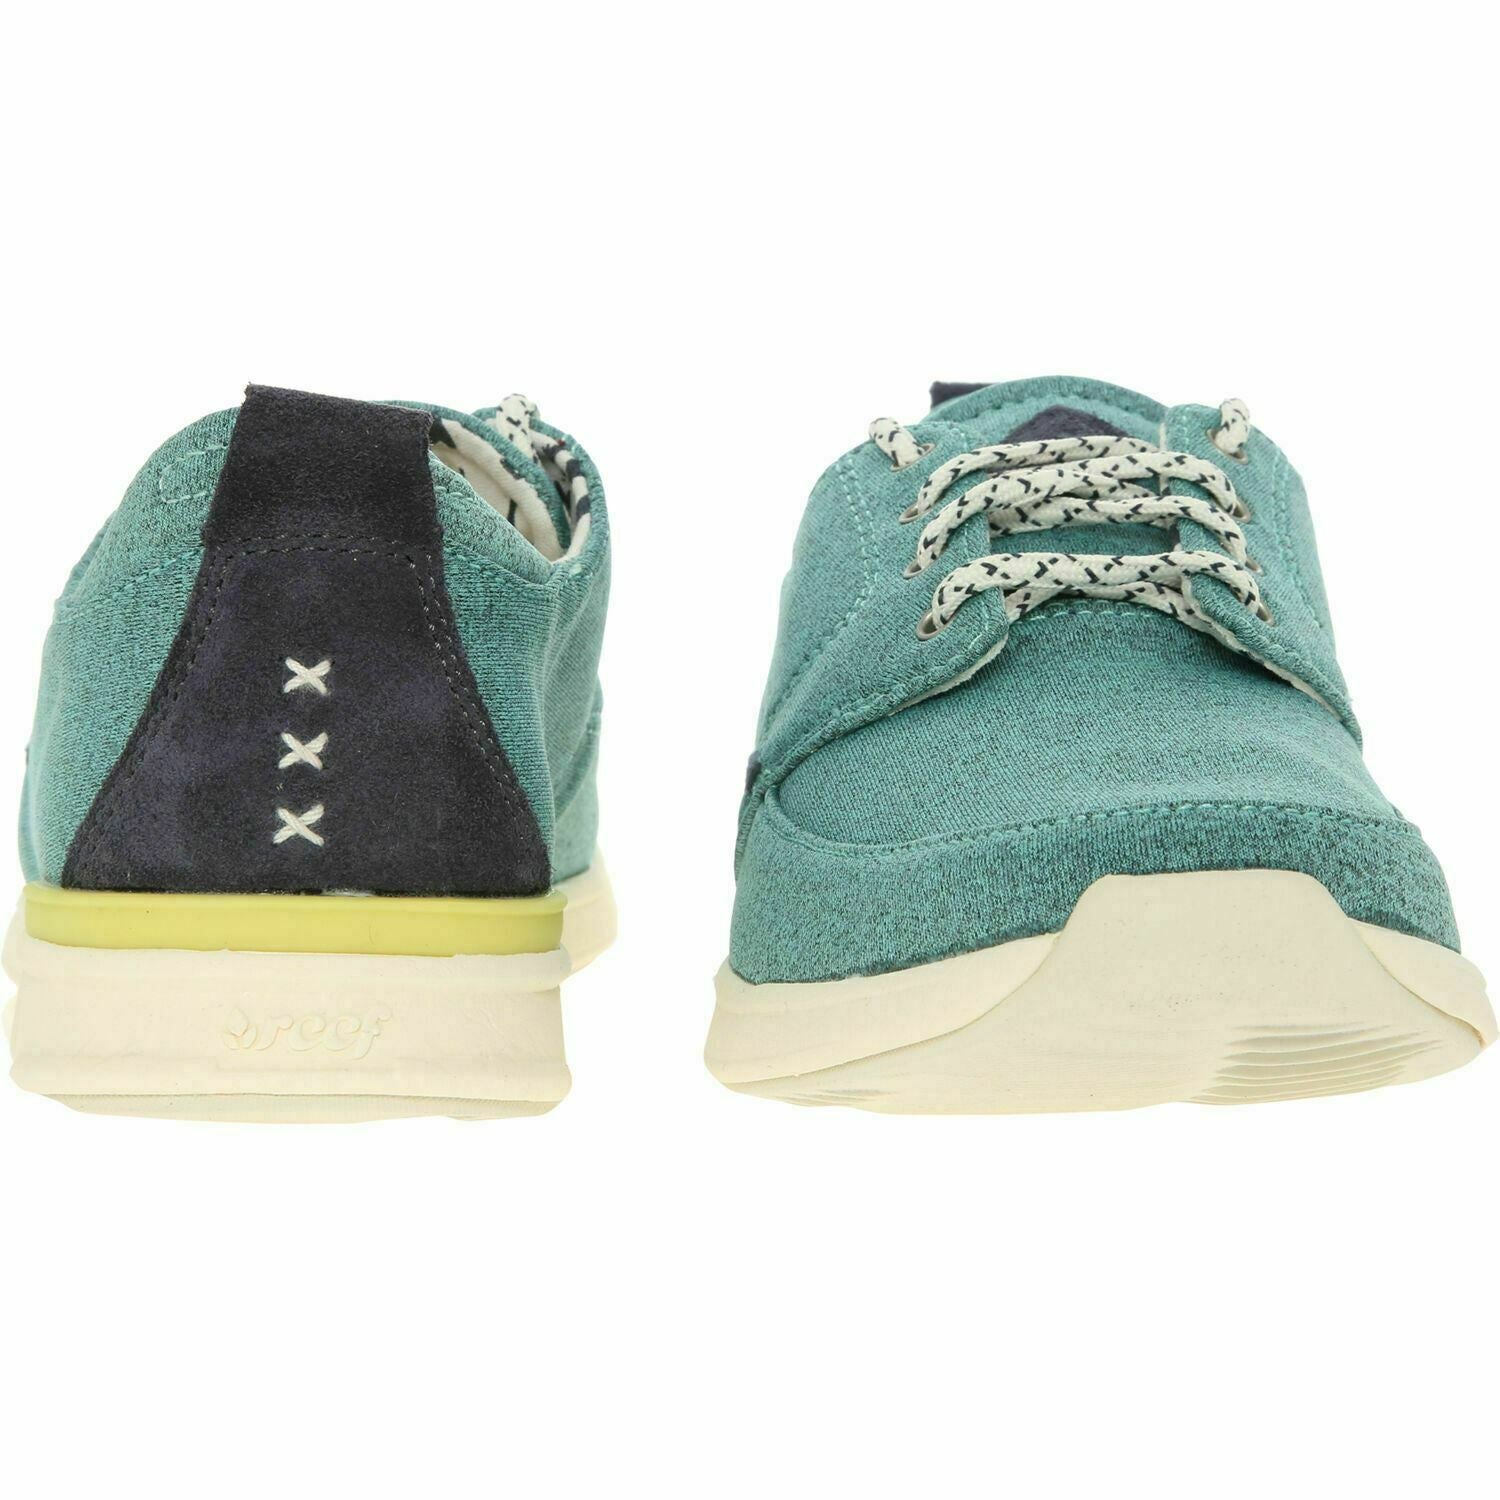 Women's Reef Rover Low Trainers Sneakers in Green/Blue UK 5 EUR 37.5 USA 7